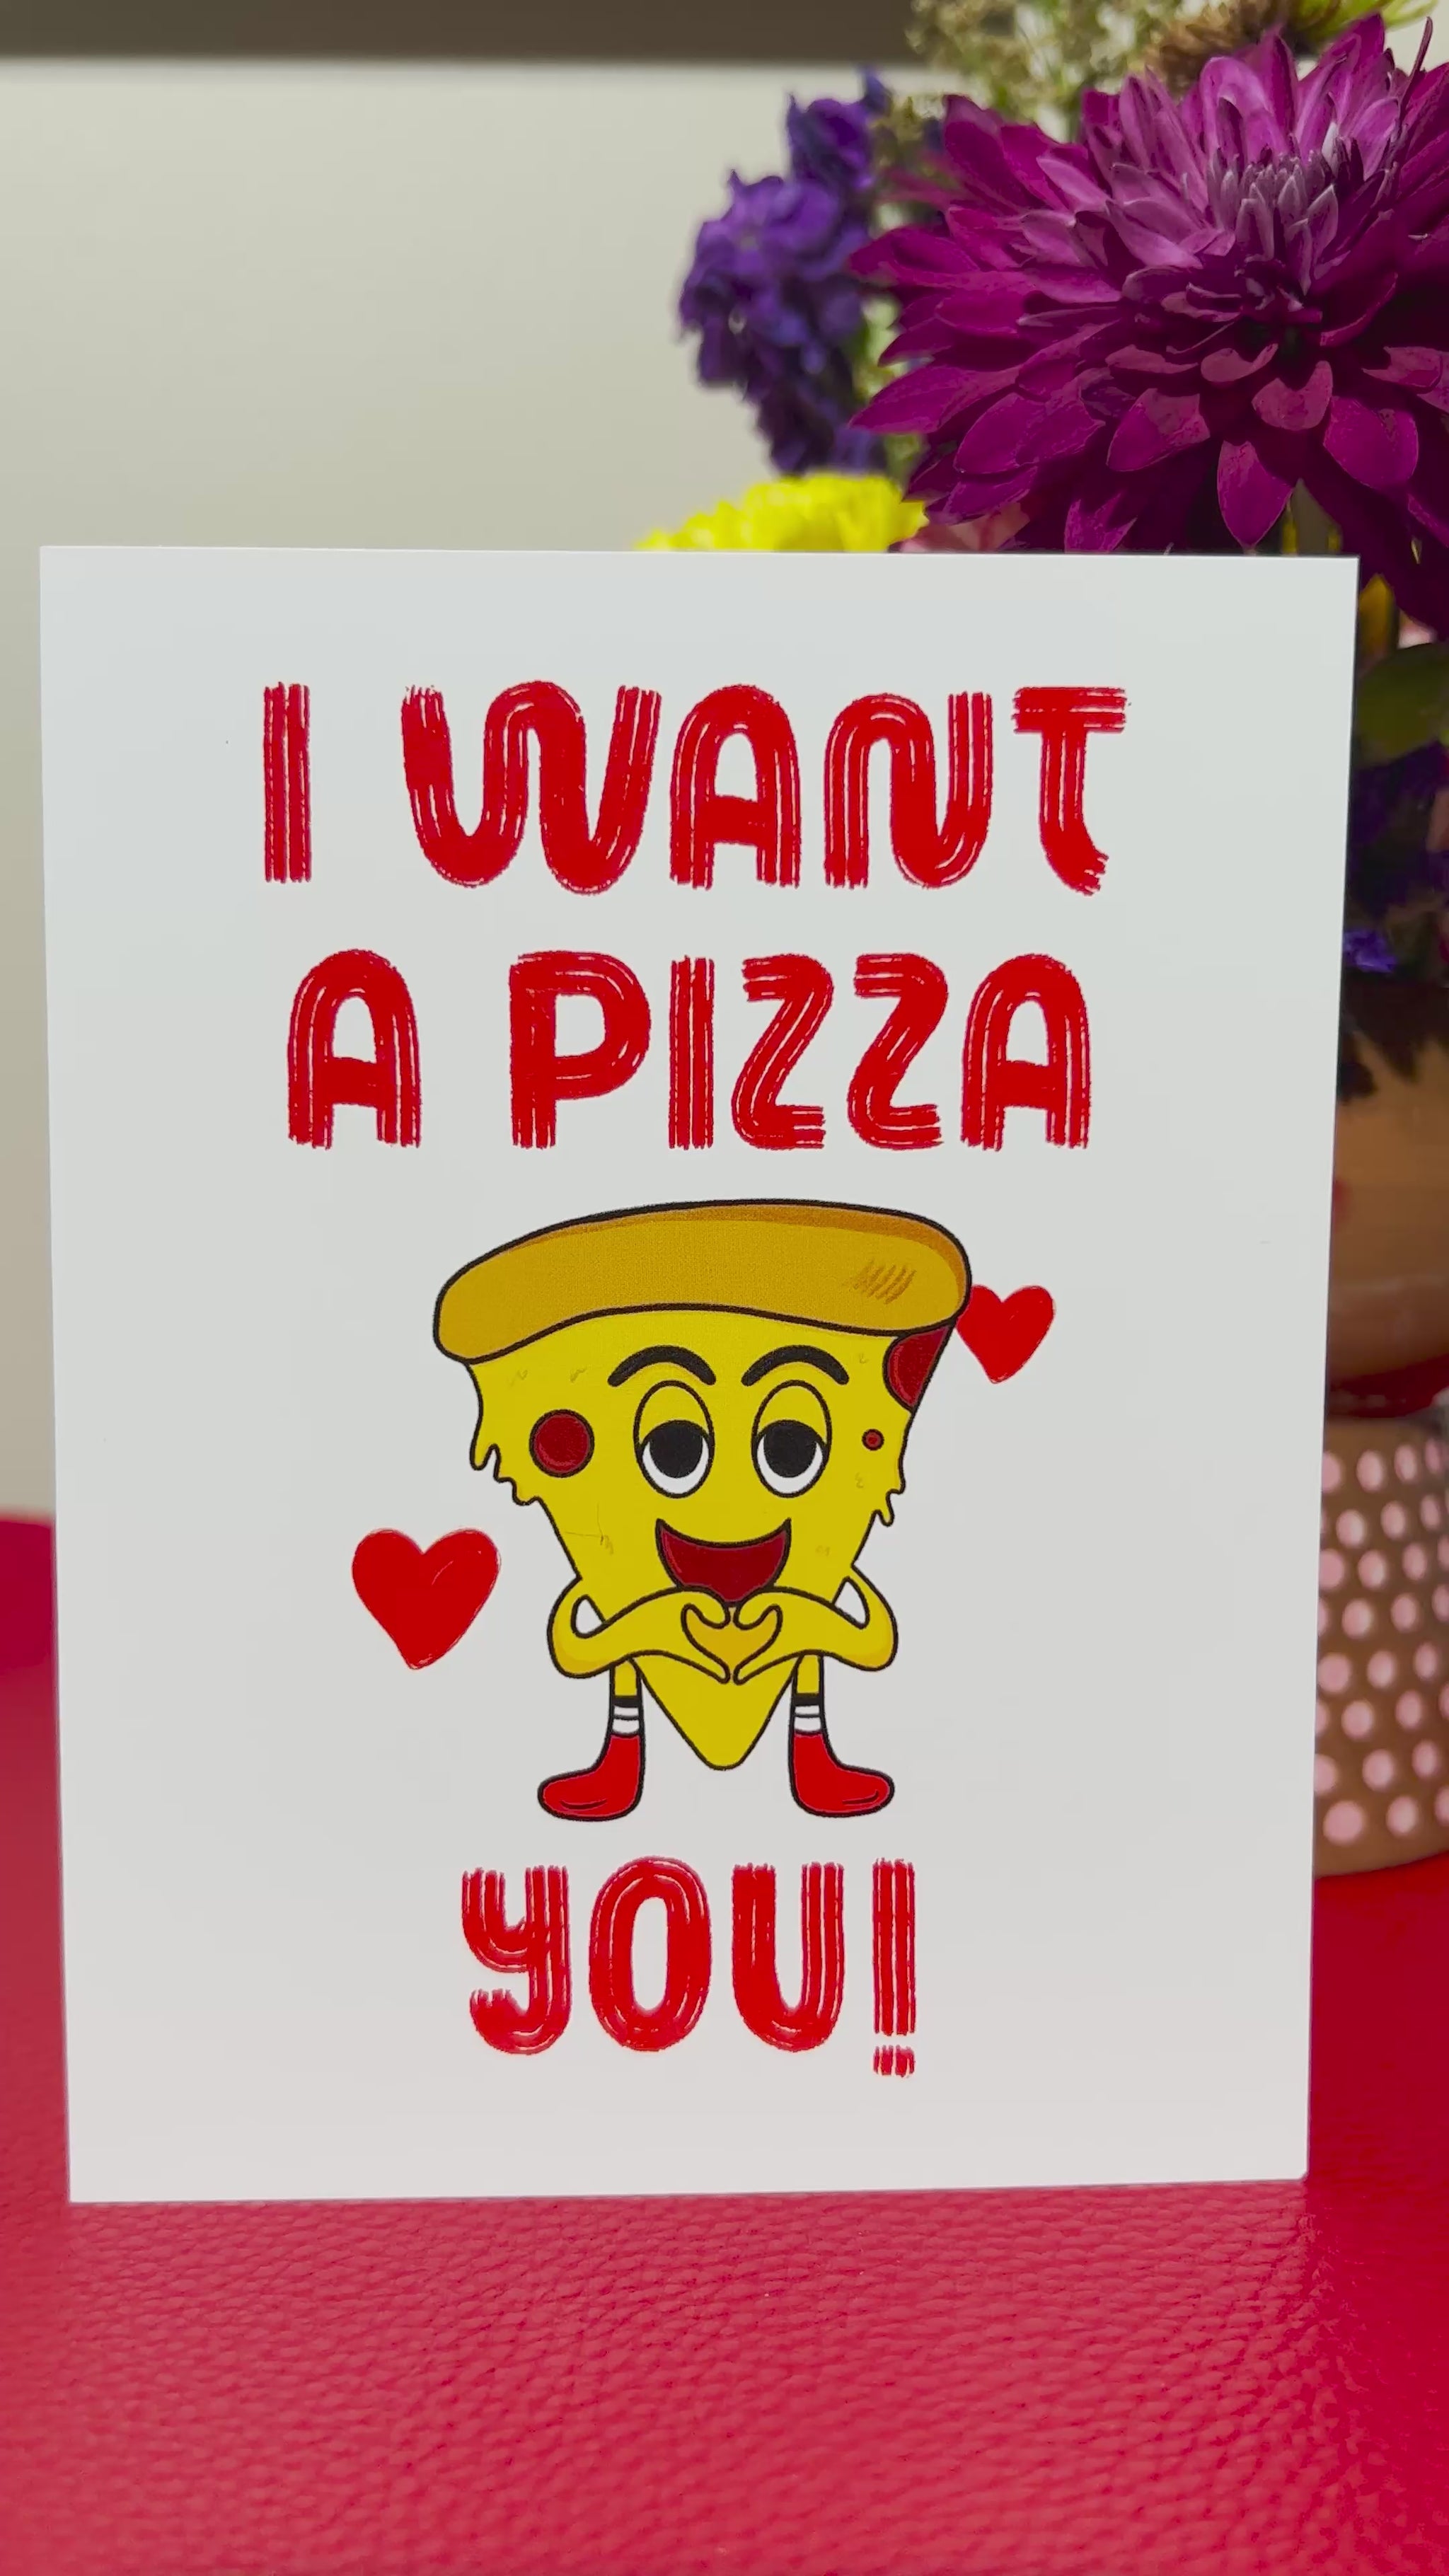 Buy Love A Pizza You 4.25x5.5” A2 Everyday love and Valentine's Day greeting card. Romantic, funny cards from Goods Made By Digitrillnana, Ashley Fletcher. Relationship, anniversary, and engagement cards for your partner, spouse, wife, husband, girlfriend or boyfriend. National Pizza Day. Black Woman Owned